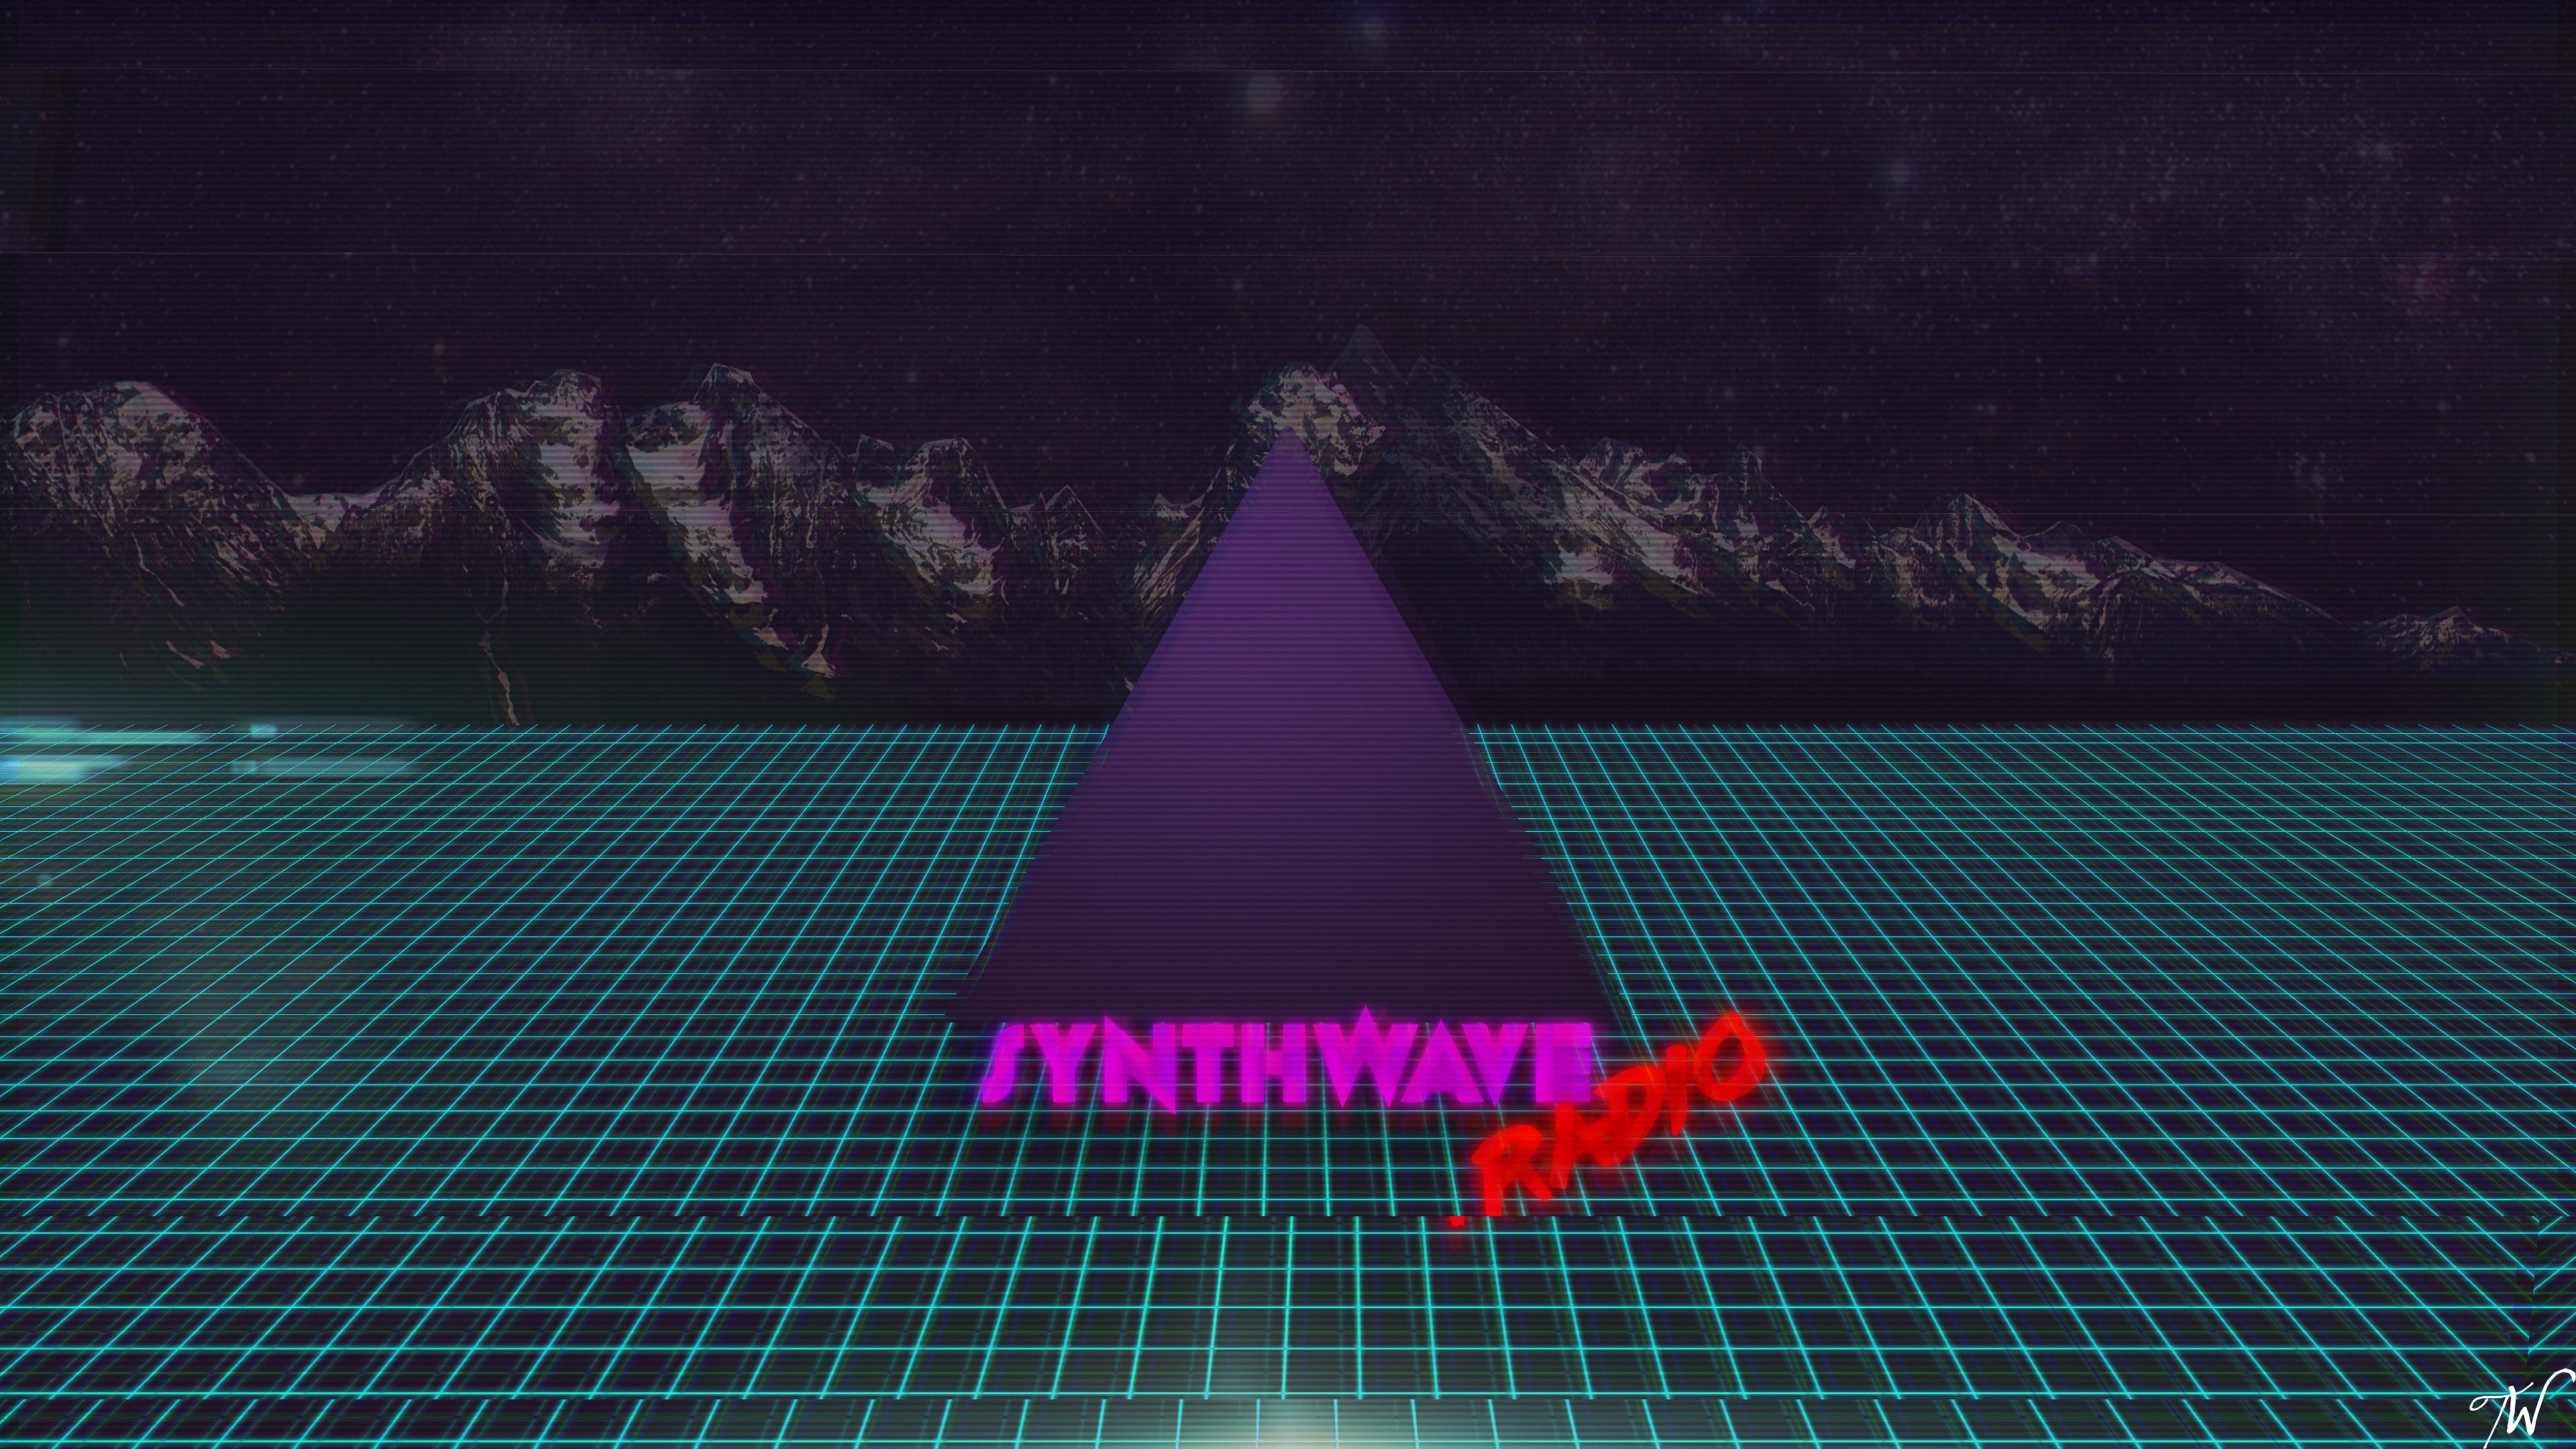 General Synthwave New Retro Wave 1980s Retro Style